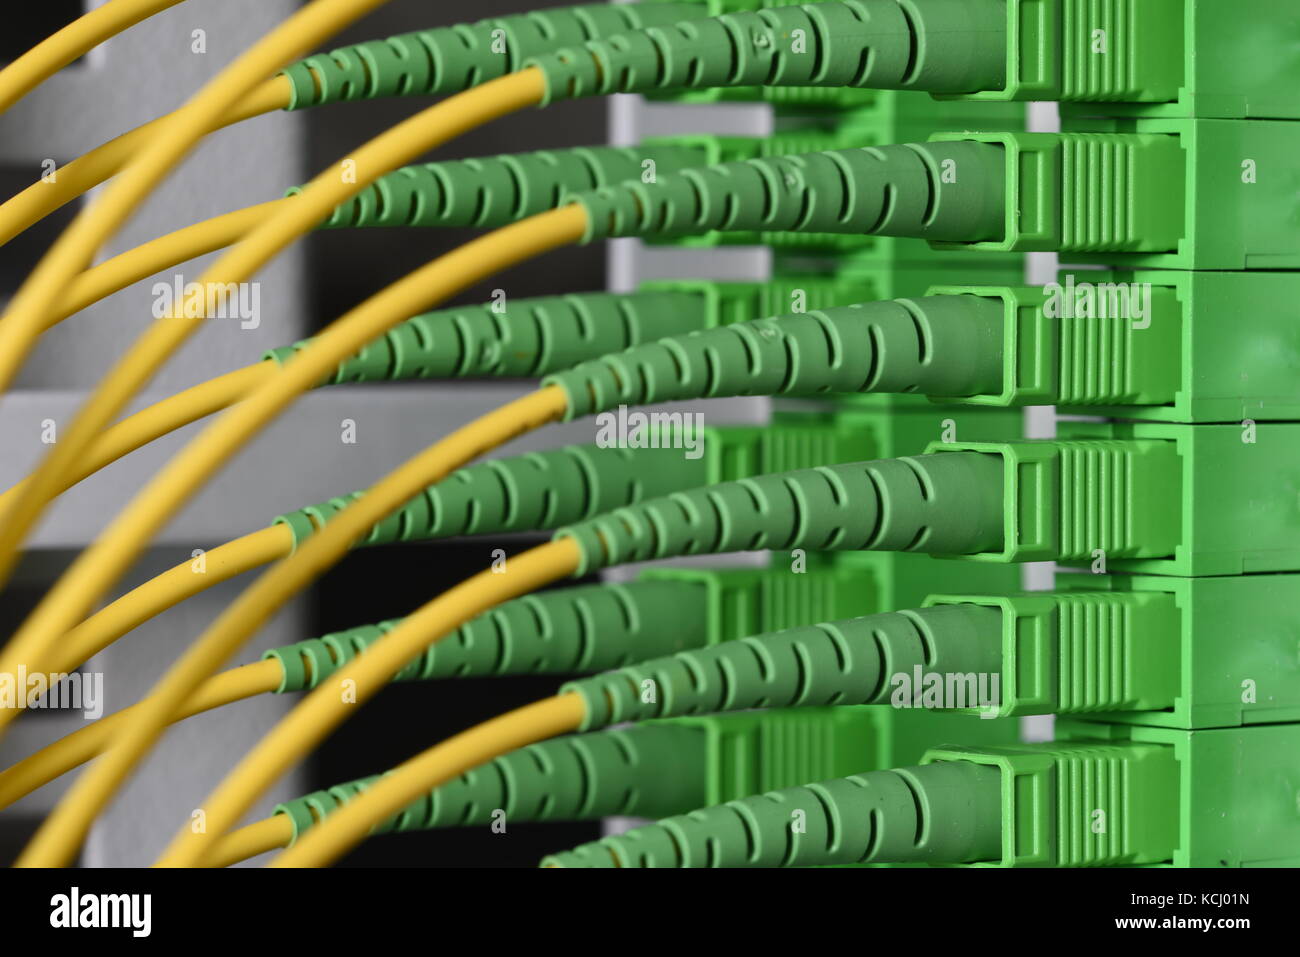 Fiber optical network cables Stock Photo